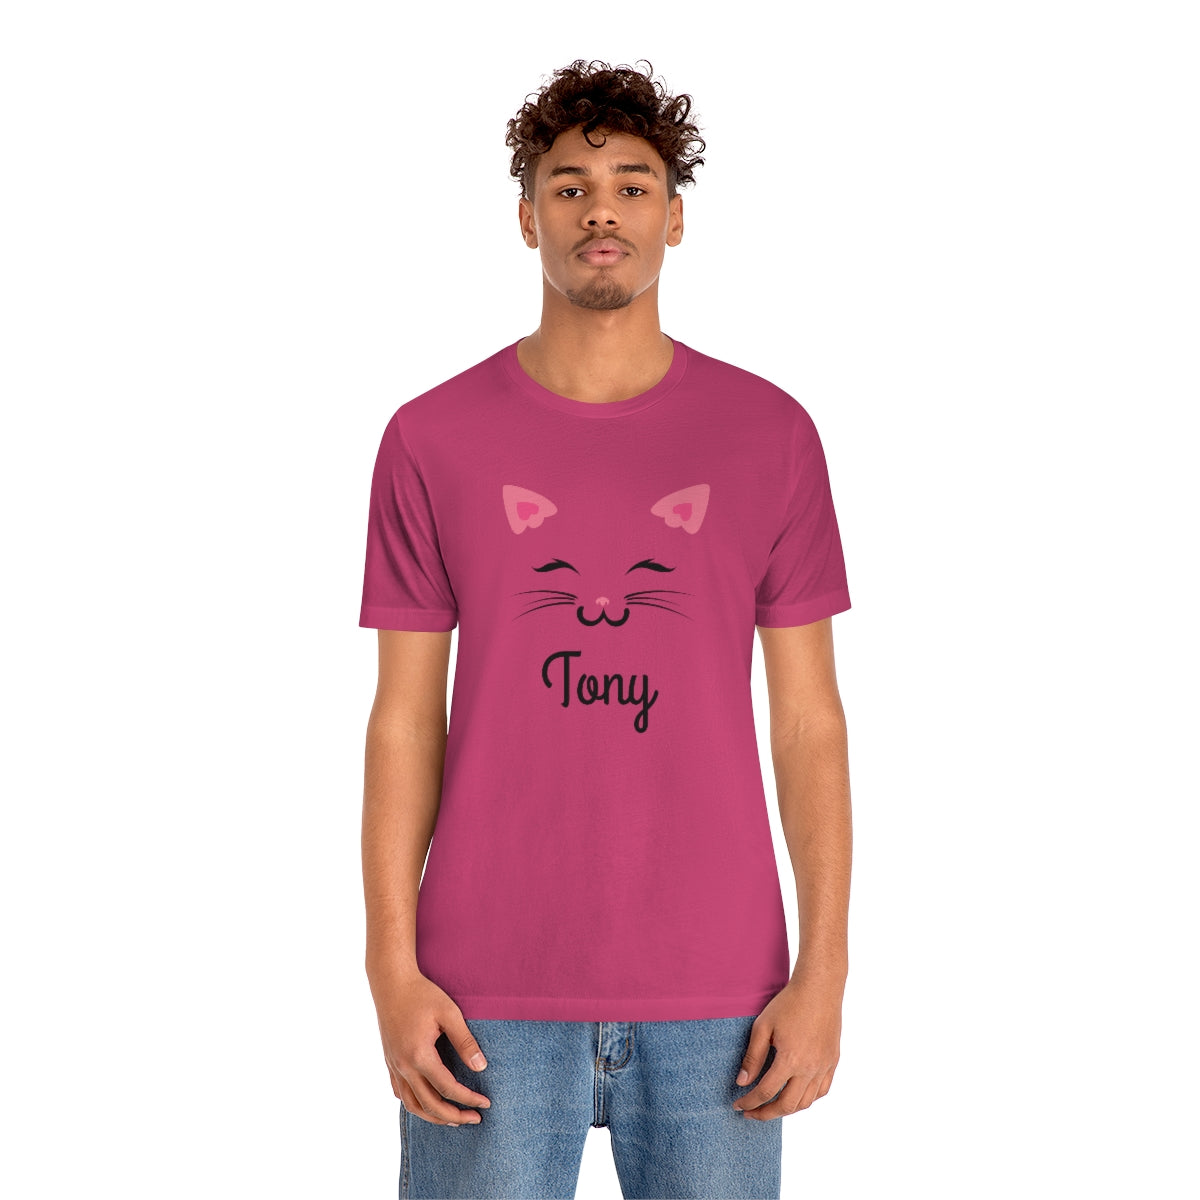 CAT MEMORIAL TEE PERSONALIZED UNISEX JERSY, CAT LINE ART FACE SHIRT